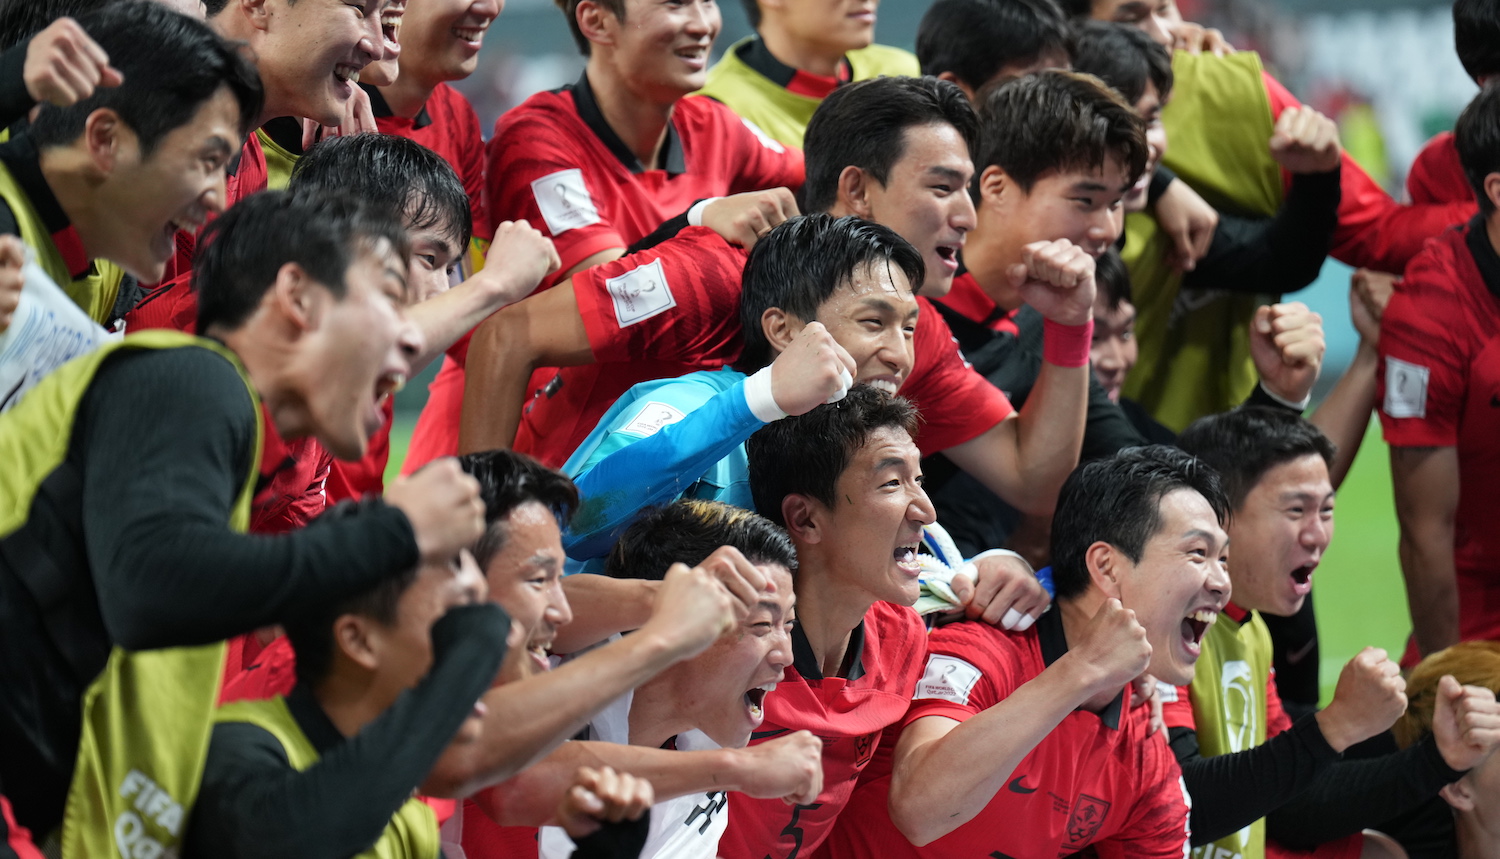 AL RAYYAN, QATAR - DECEMBER 02: Players of Korea celebrate during the FIFA World Cup Qatar 2022 Group H match between Korea Republic and Portugal at Education City Stadium on December 02, 2022 in Al Rayyan, Qatar. (Photo by Amin Mohammad Jamali/Getty Images)